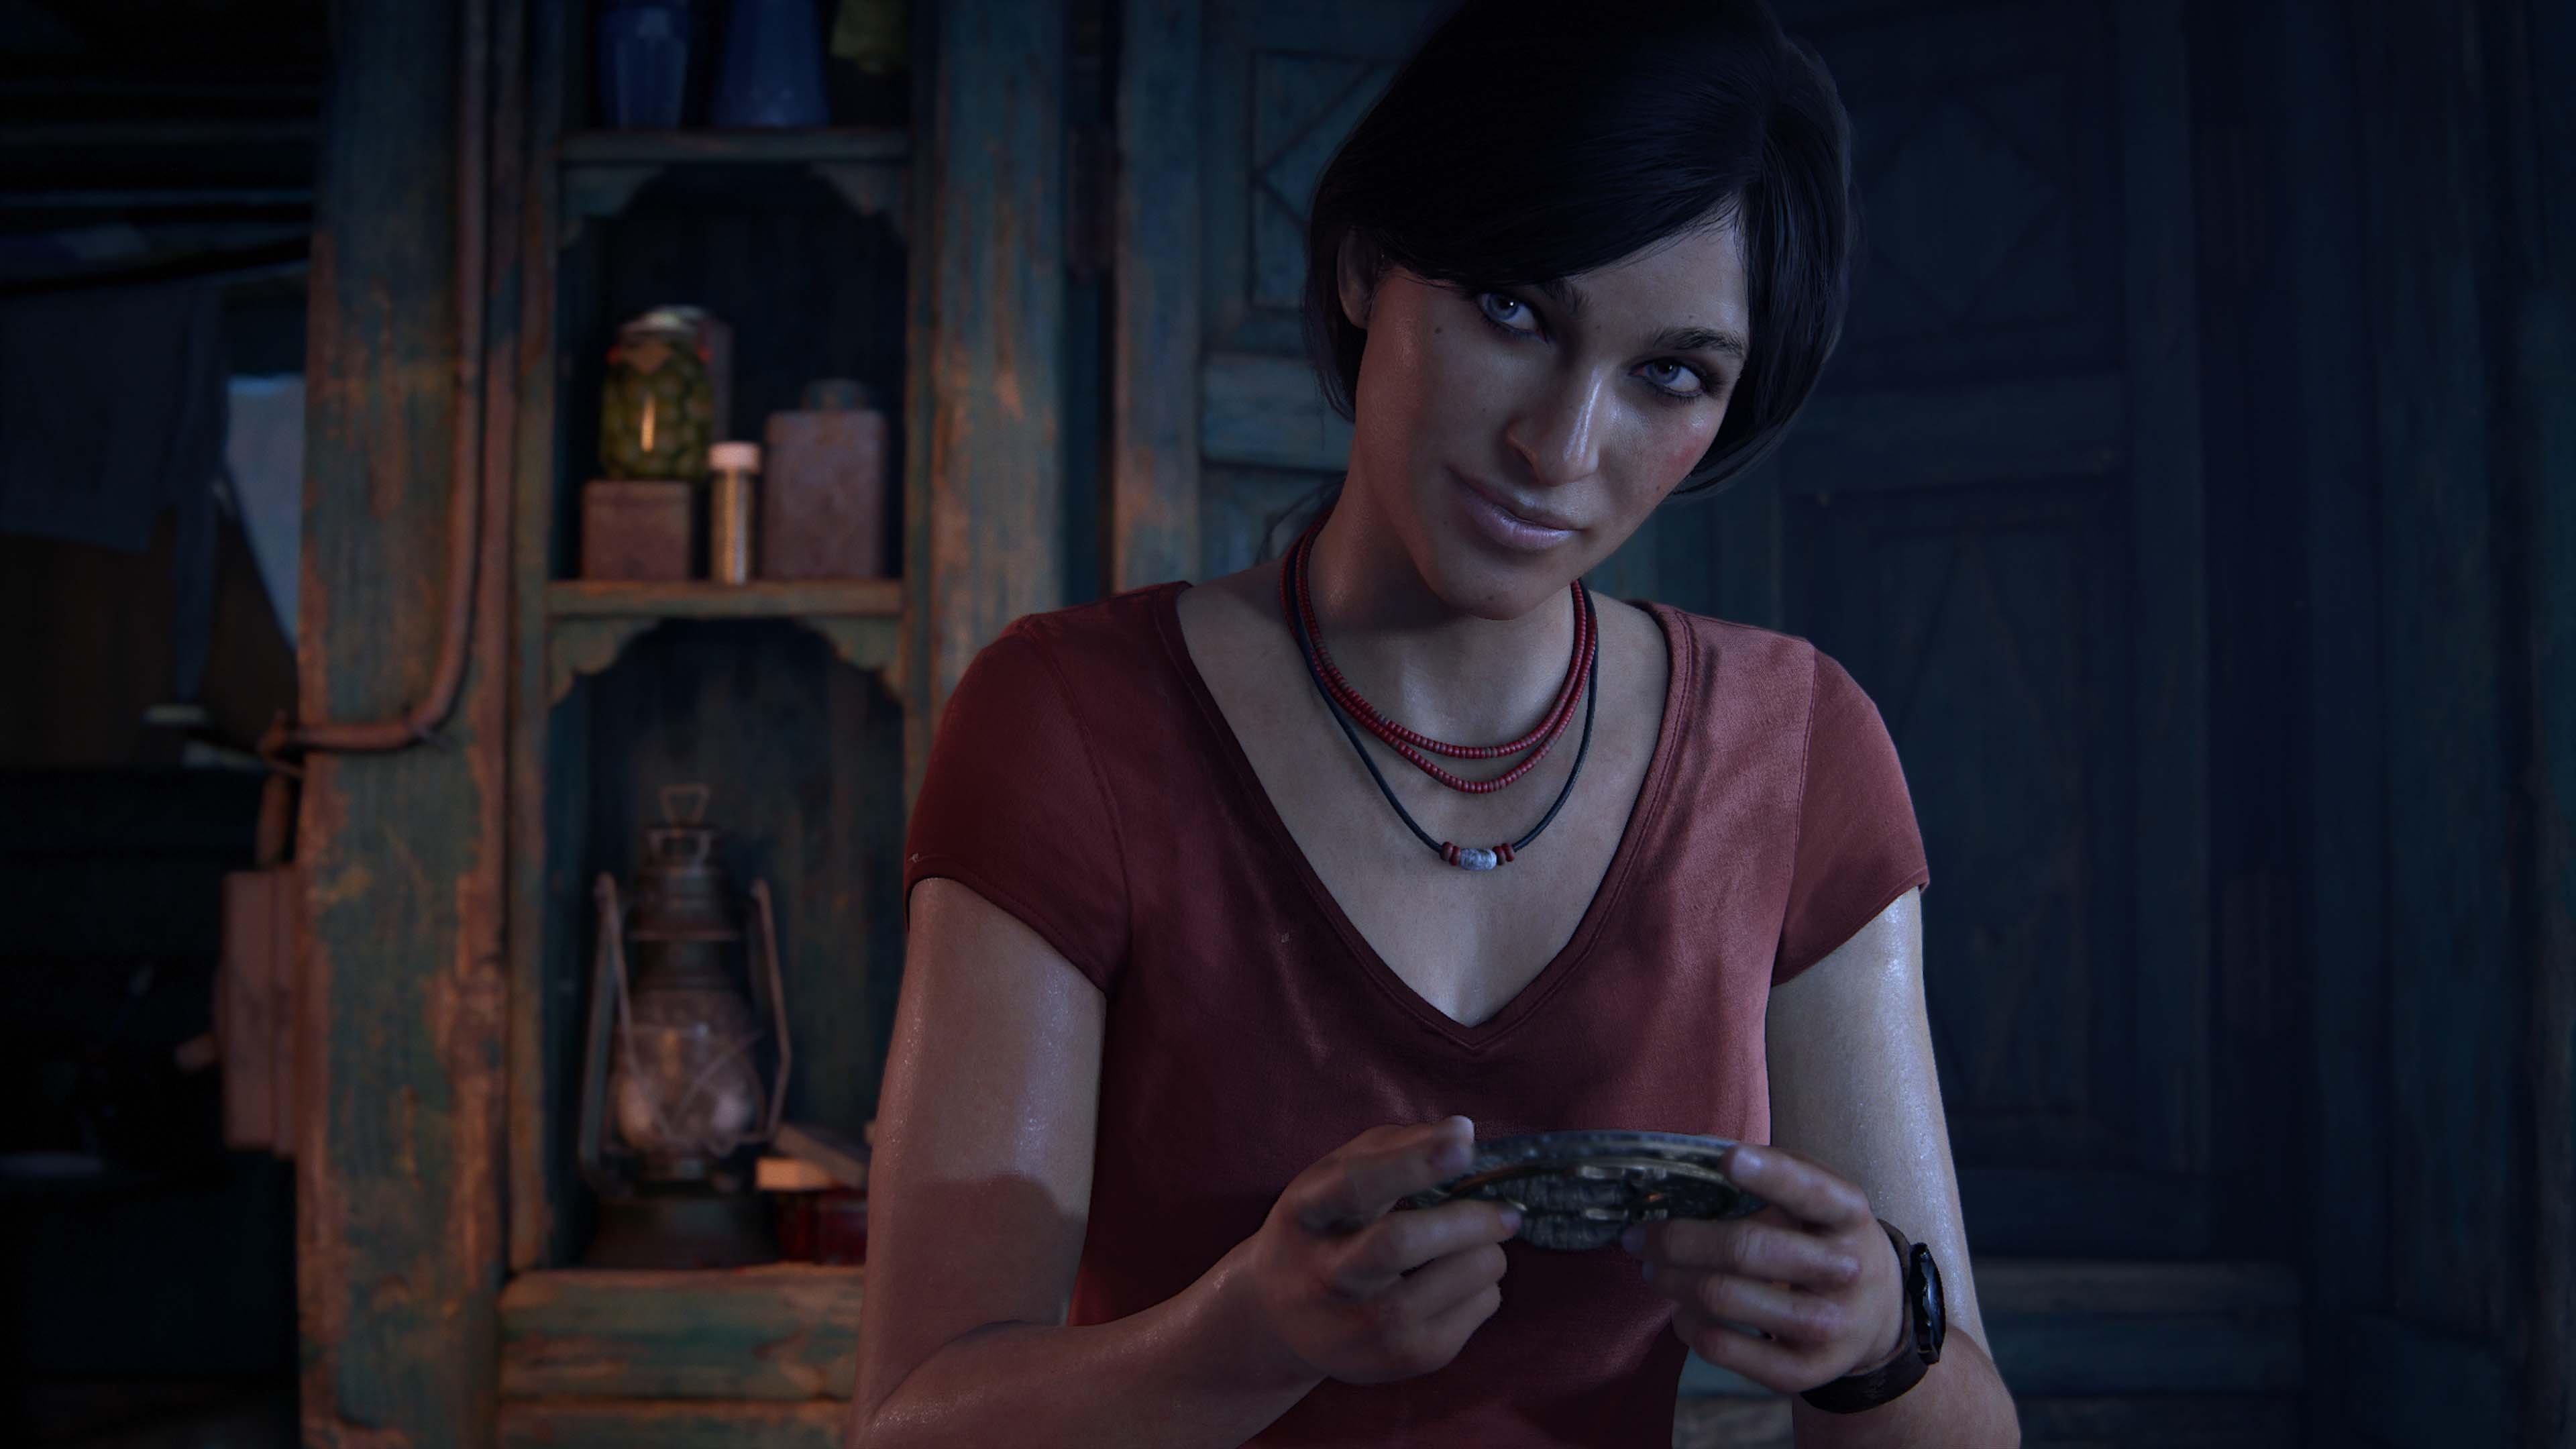 Uncharted The Lost Legacy Gameplay 4K Stream on PS5 All Parts, by  GamePlayHelios